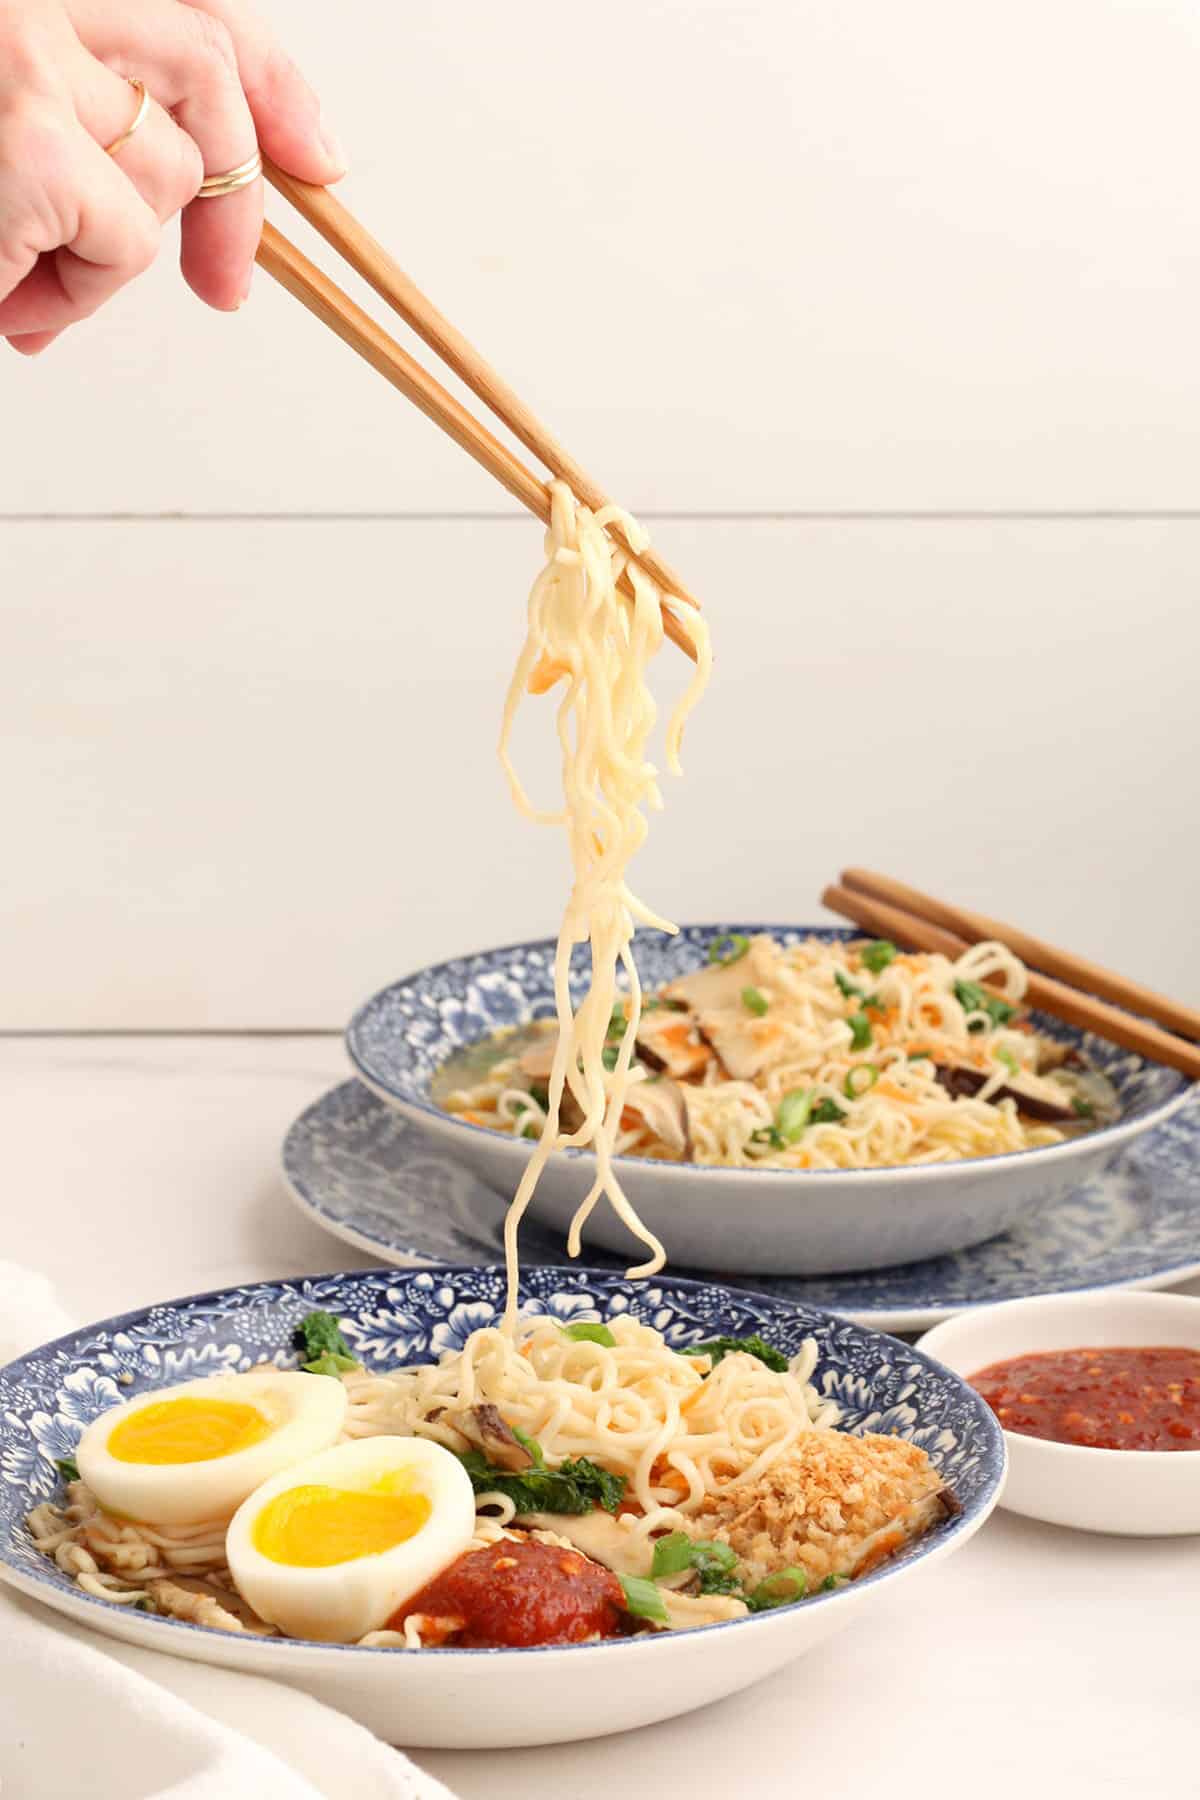 someone using chopsticks to get a bite of homemade ramen noodles out of a large blue bowl